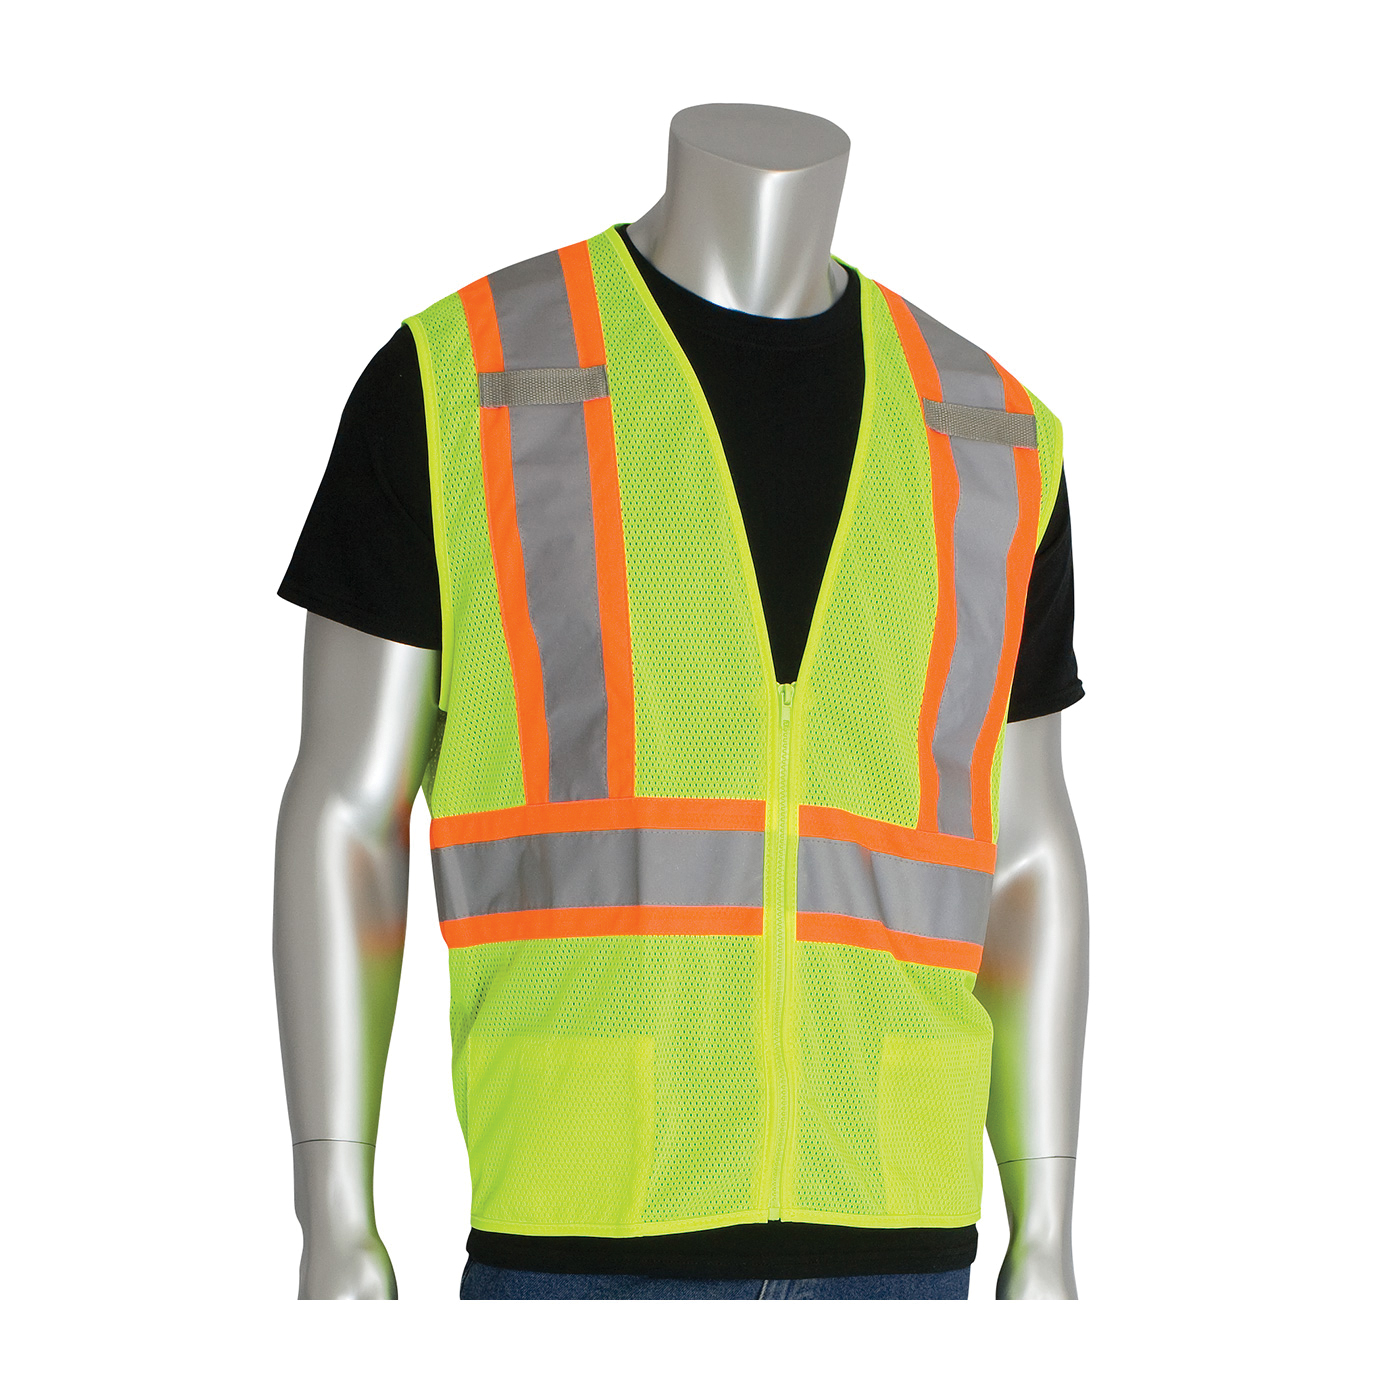 PIP® 302-0600D-LY/4X 2-Tone Safety Access Vest With "D" Ring Access, 4XL, Hi-Viz Lime Yellow, Polyester, Zipper Closure, 2 Pockets, ANSI Class: Class 2, Specifications Met: ANSI 107 Type R